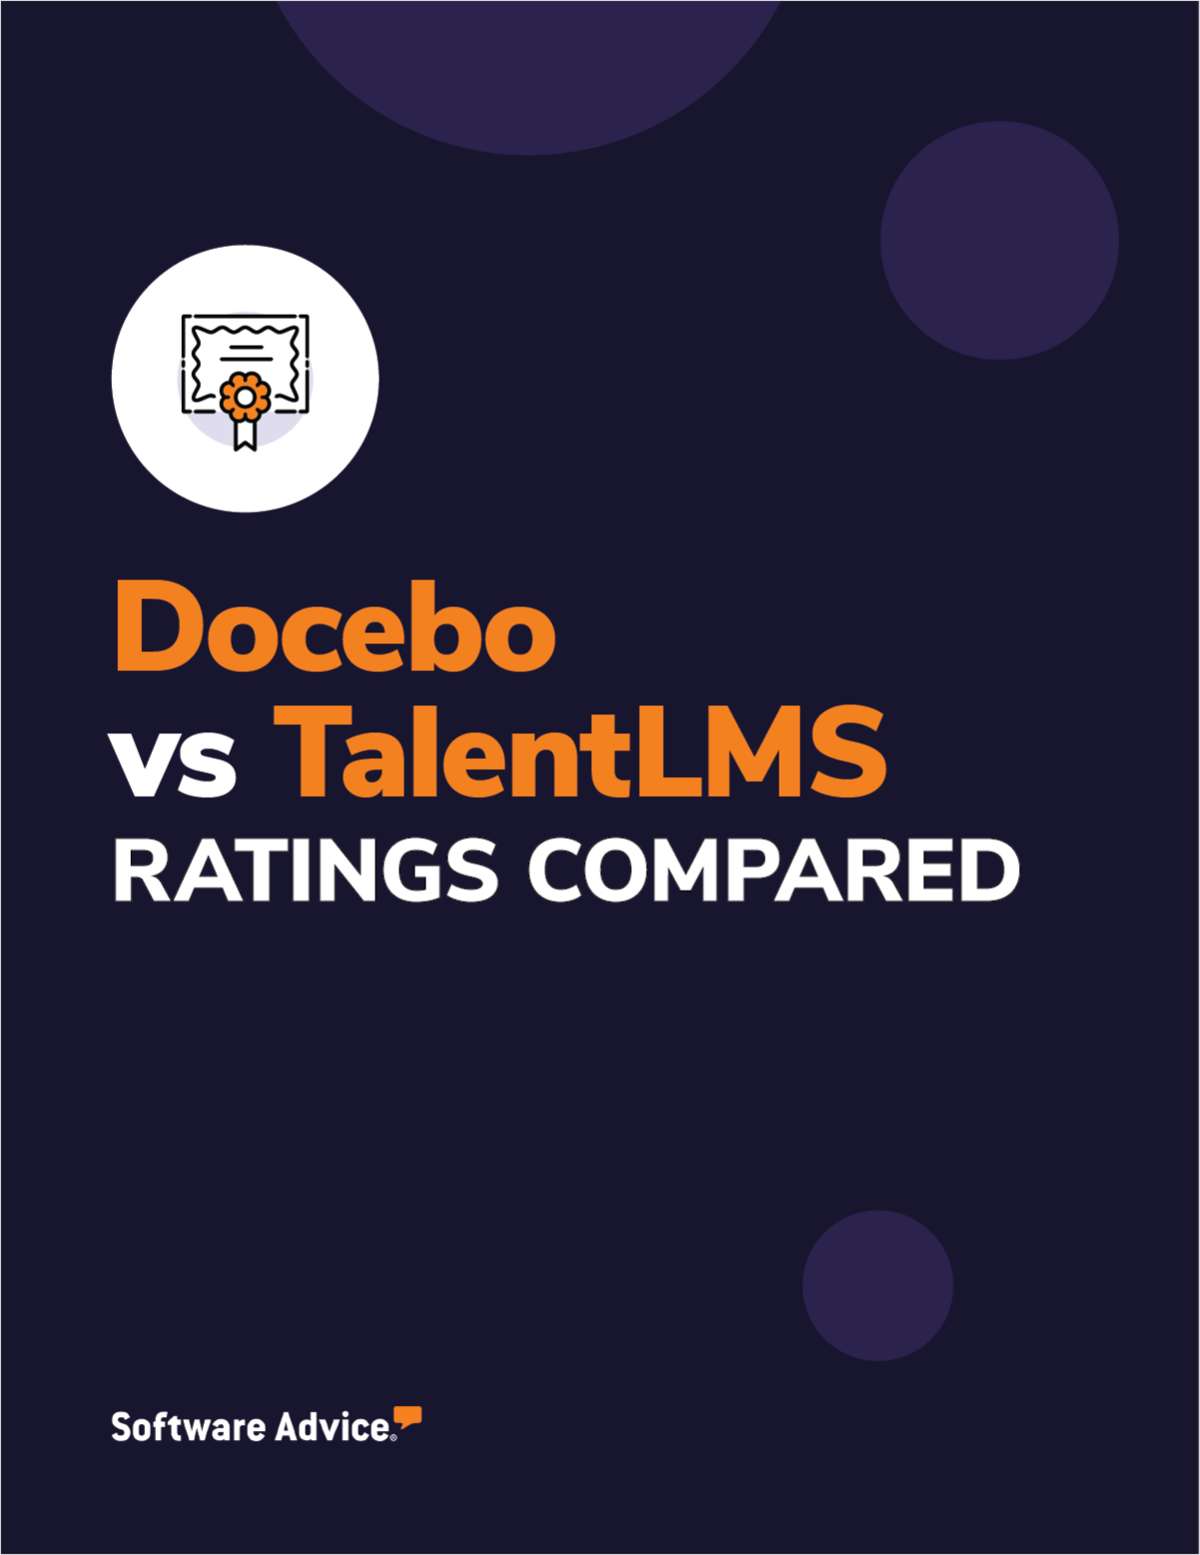 Compare Docebo Against TalentLMS: Features, Ratings and Reviews